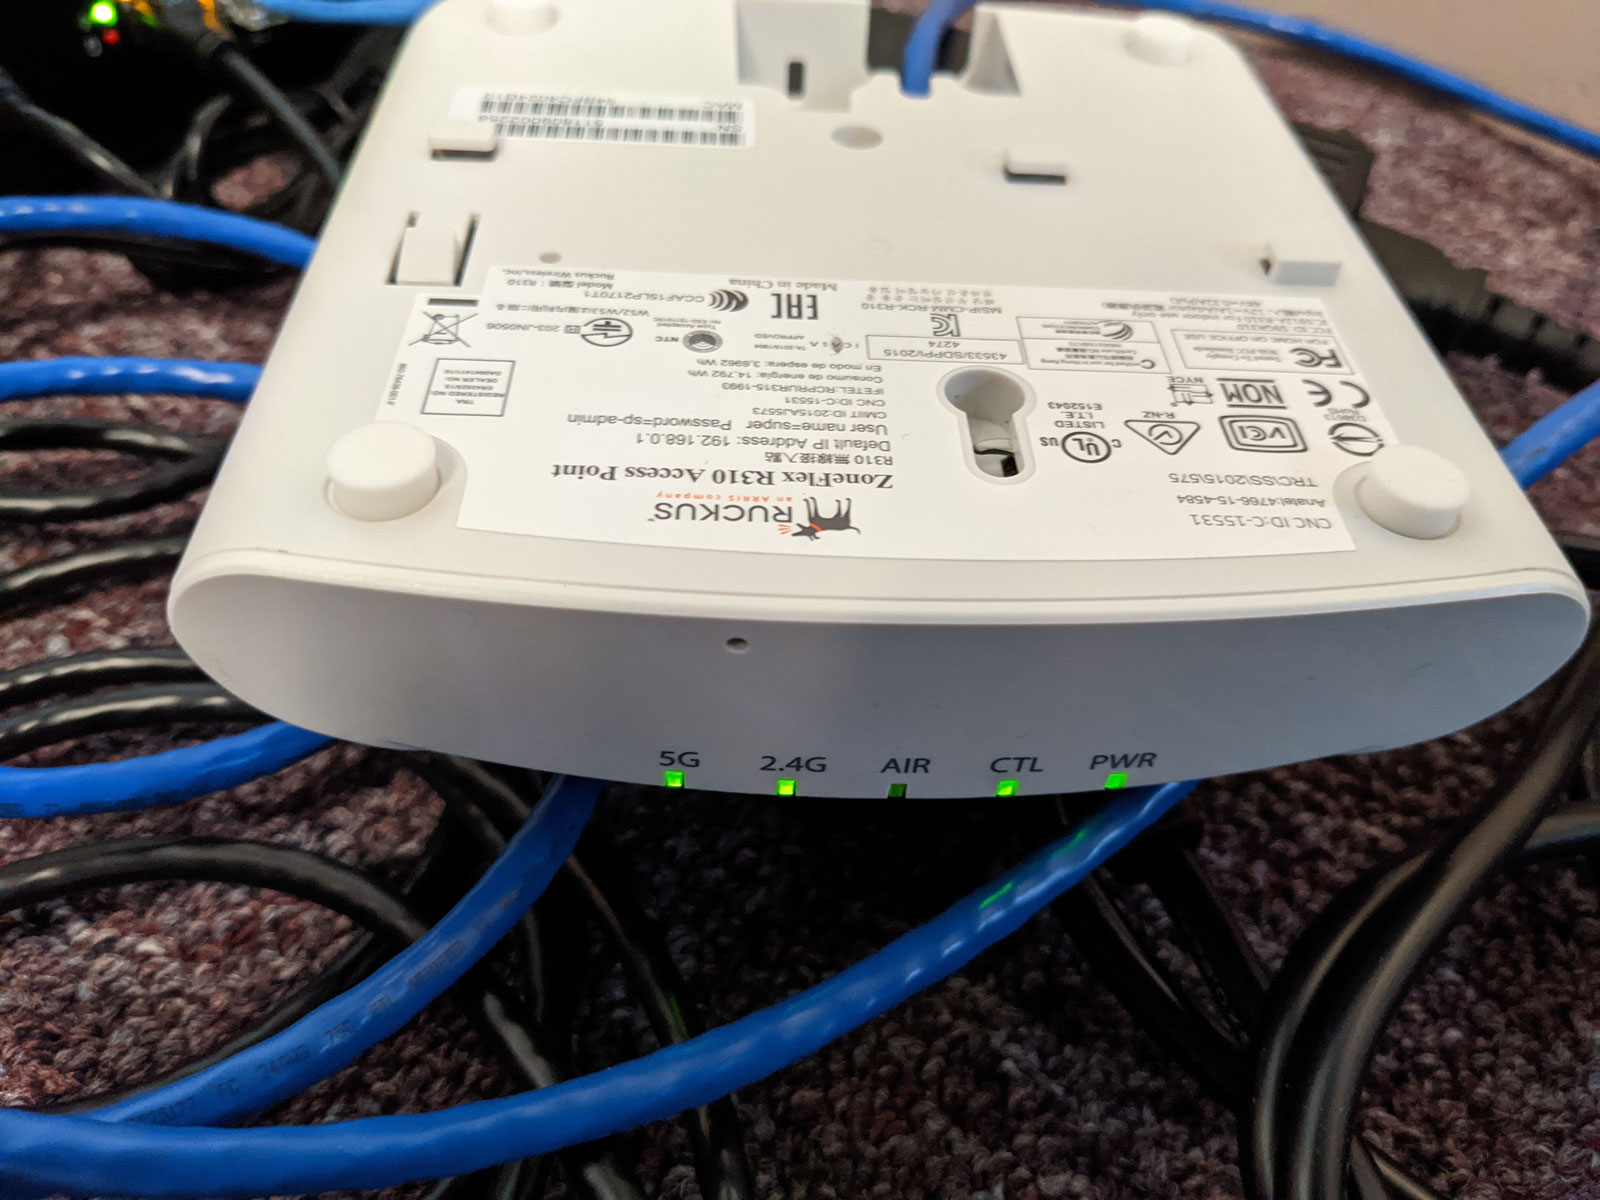 Ruckus wireless access point, not mounted